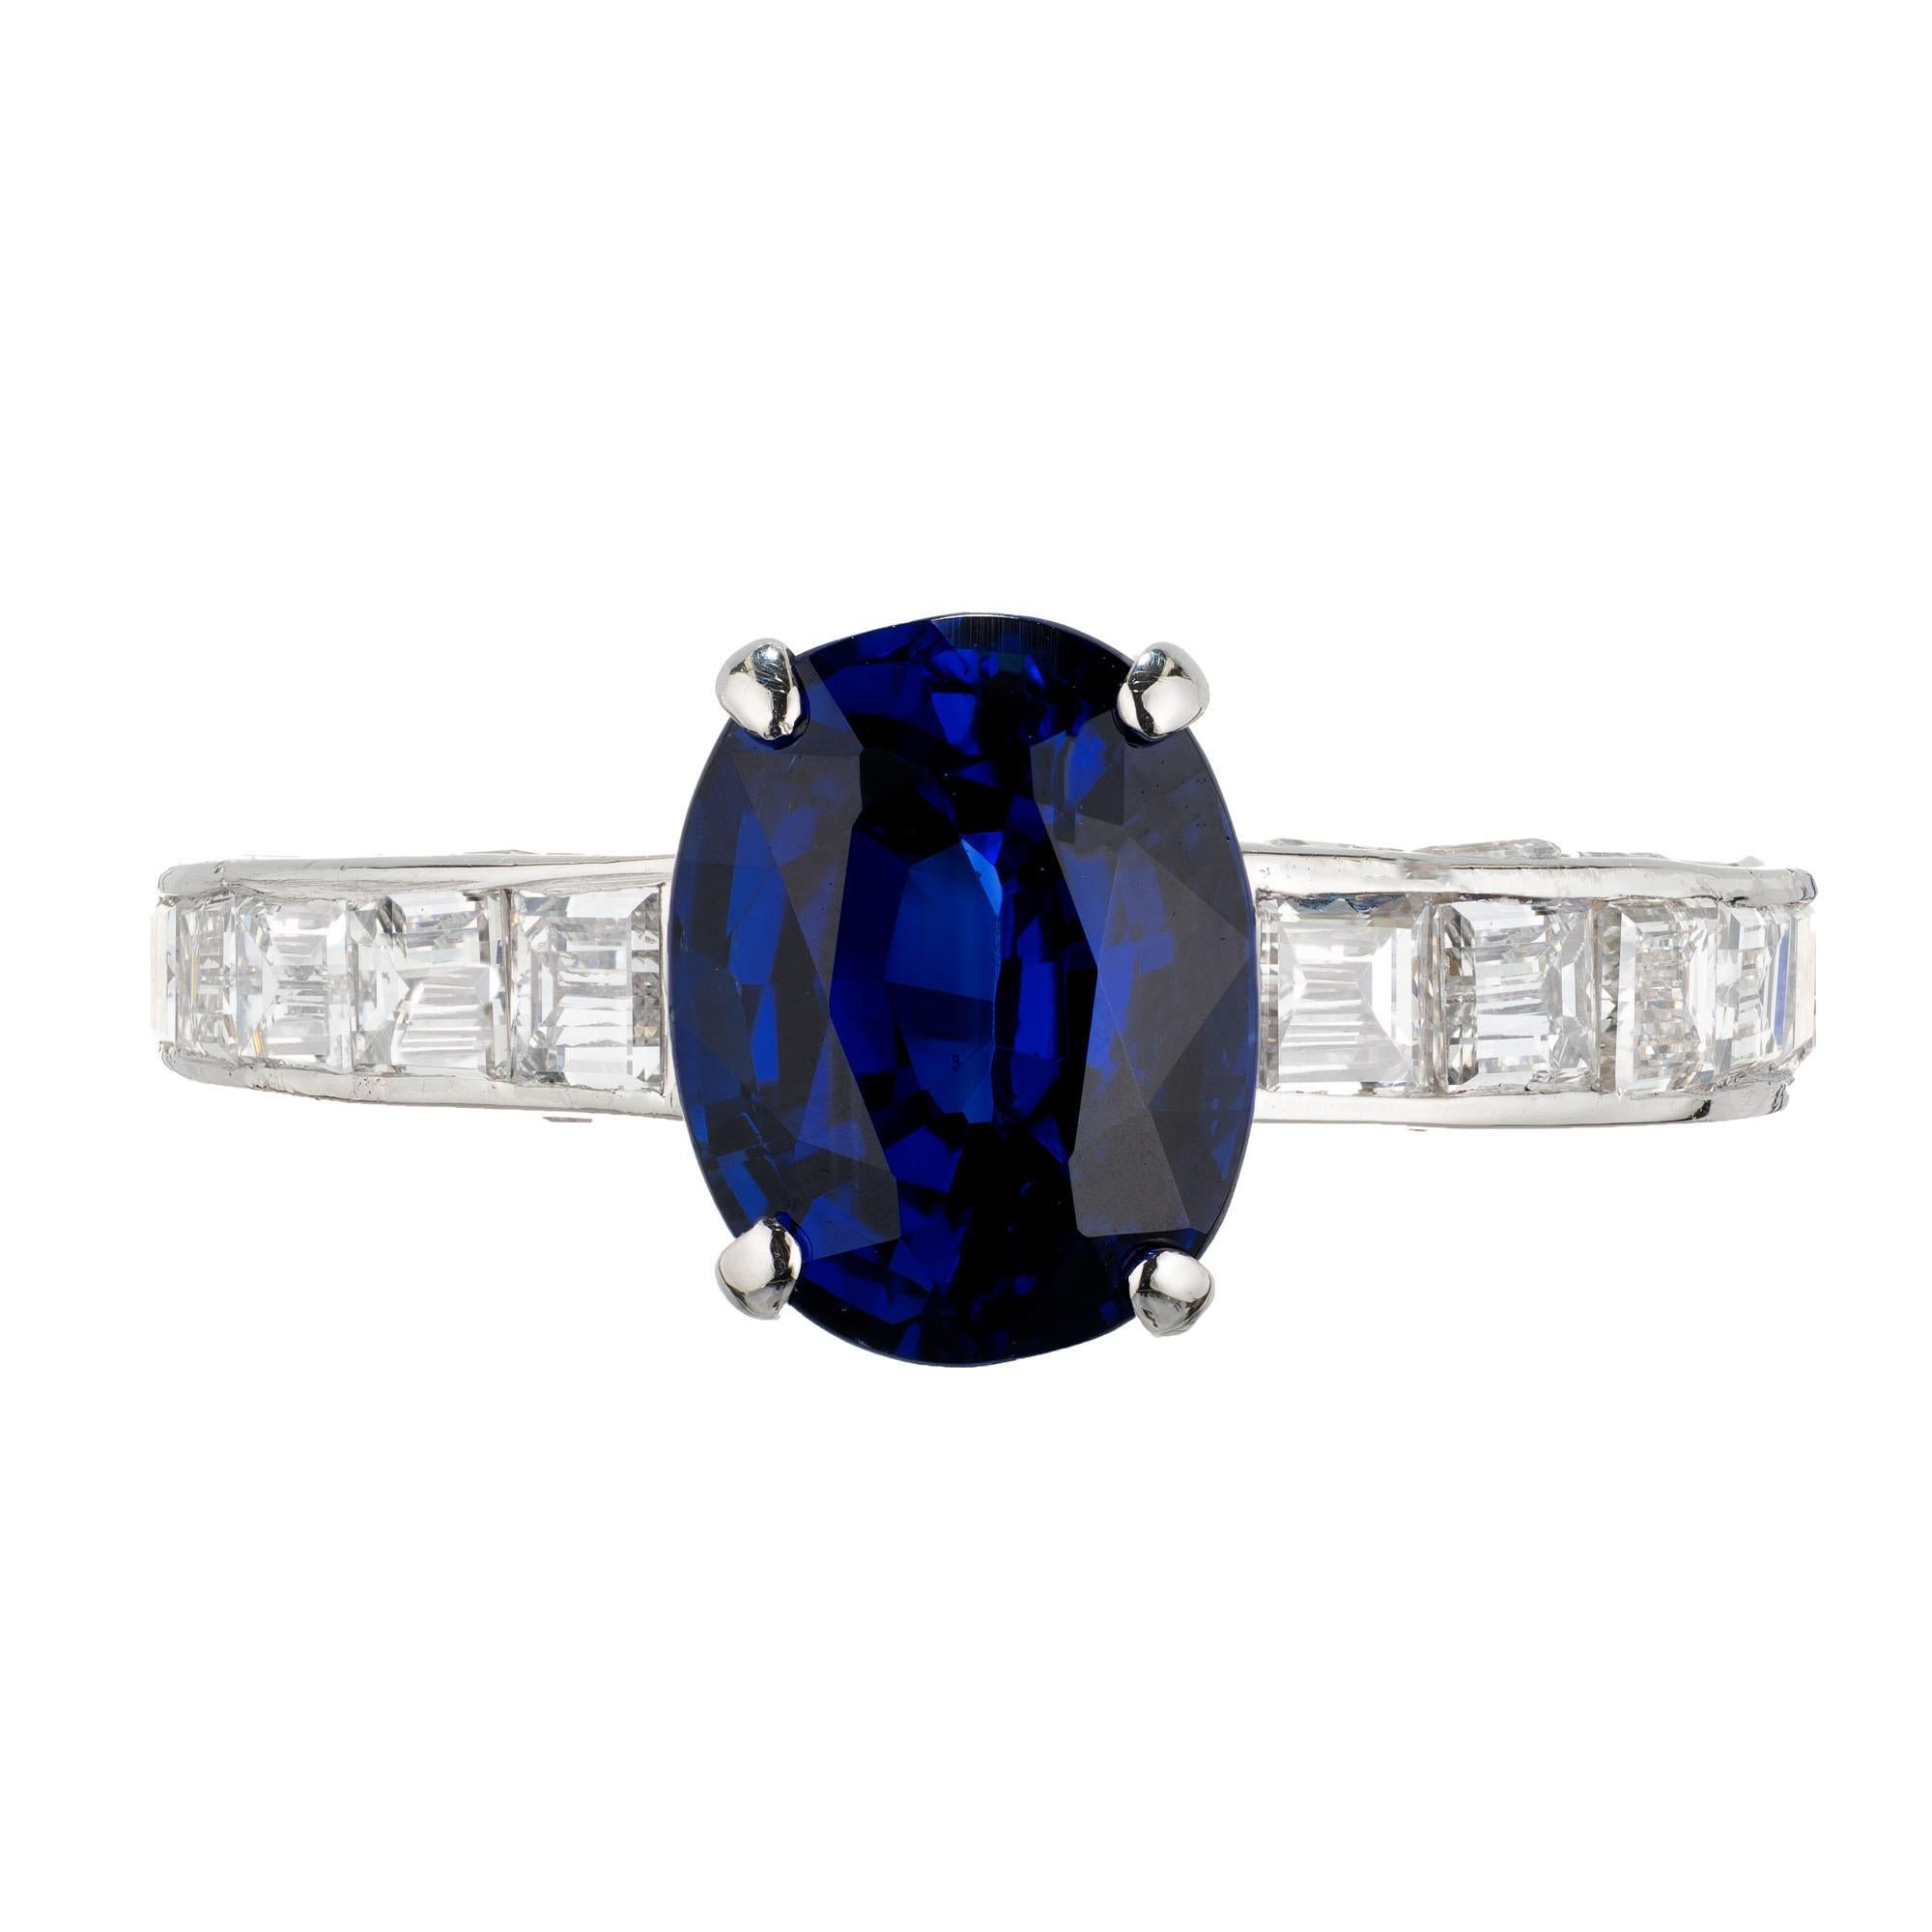 Cartier sapphire and diamond engagement ring. GIA certified oval center stone, Burma Myanmar accented by 34 square cut diamonds, channel set in the shoulders and both sides. Platinum setting. GIA certified 

1 blue oval Burma Sapphire, approx. total